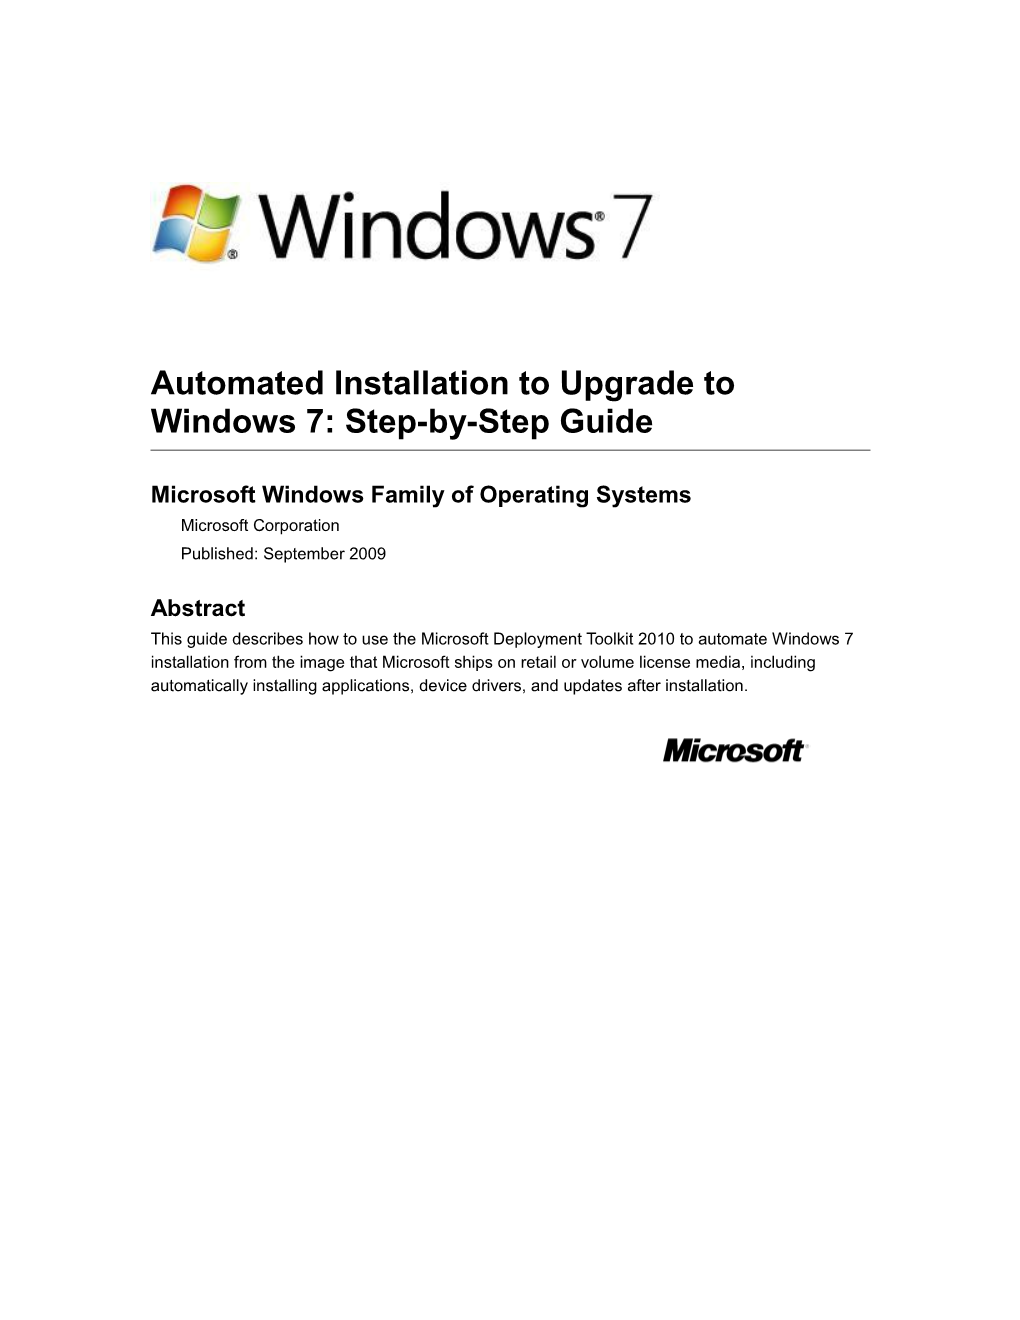 Automated Installation to Upgrade to Windows 7: Step-By-Step Guide